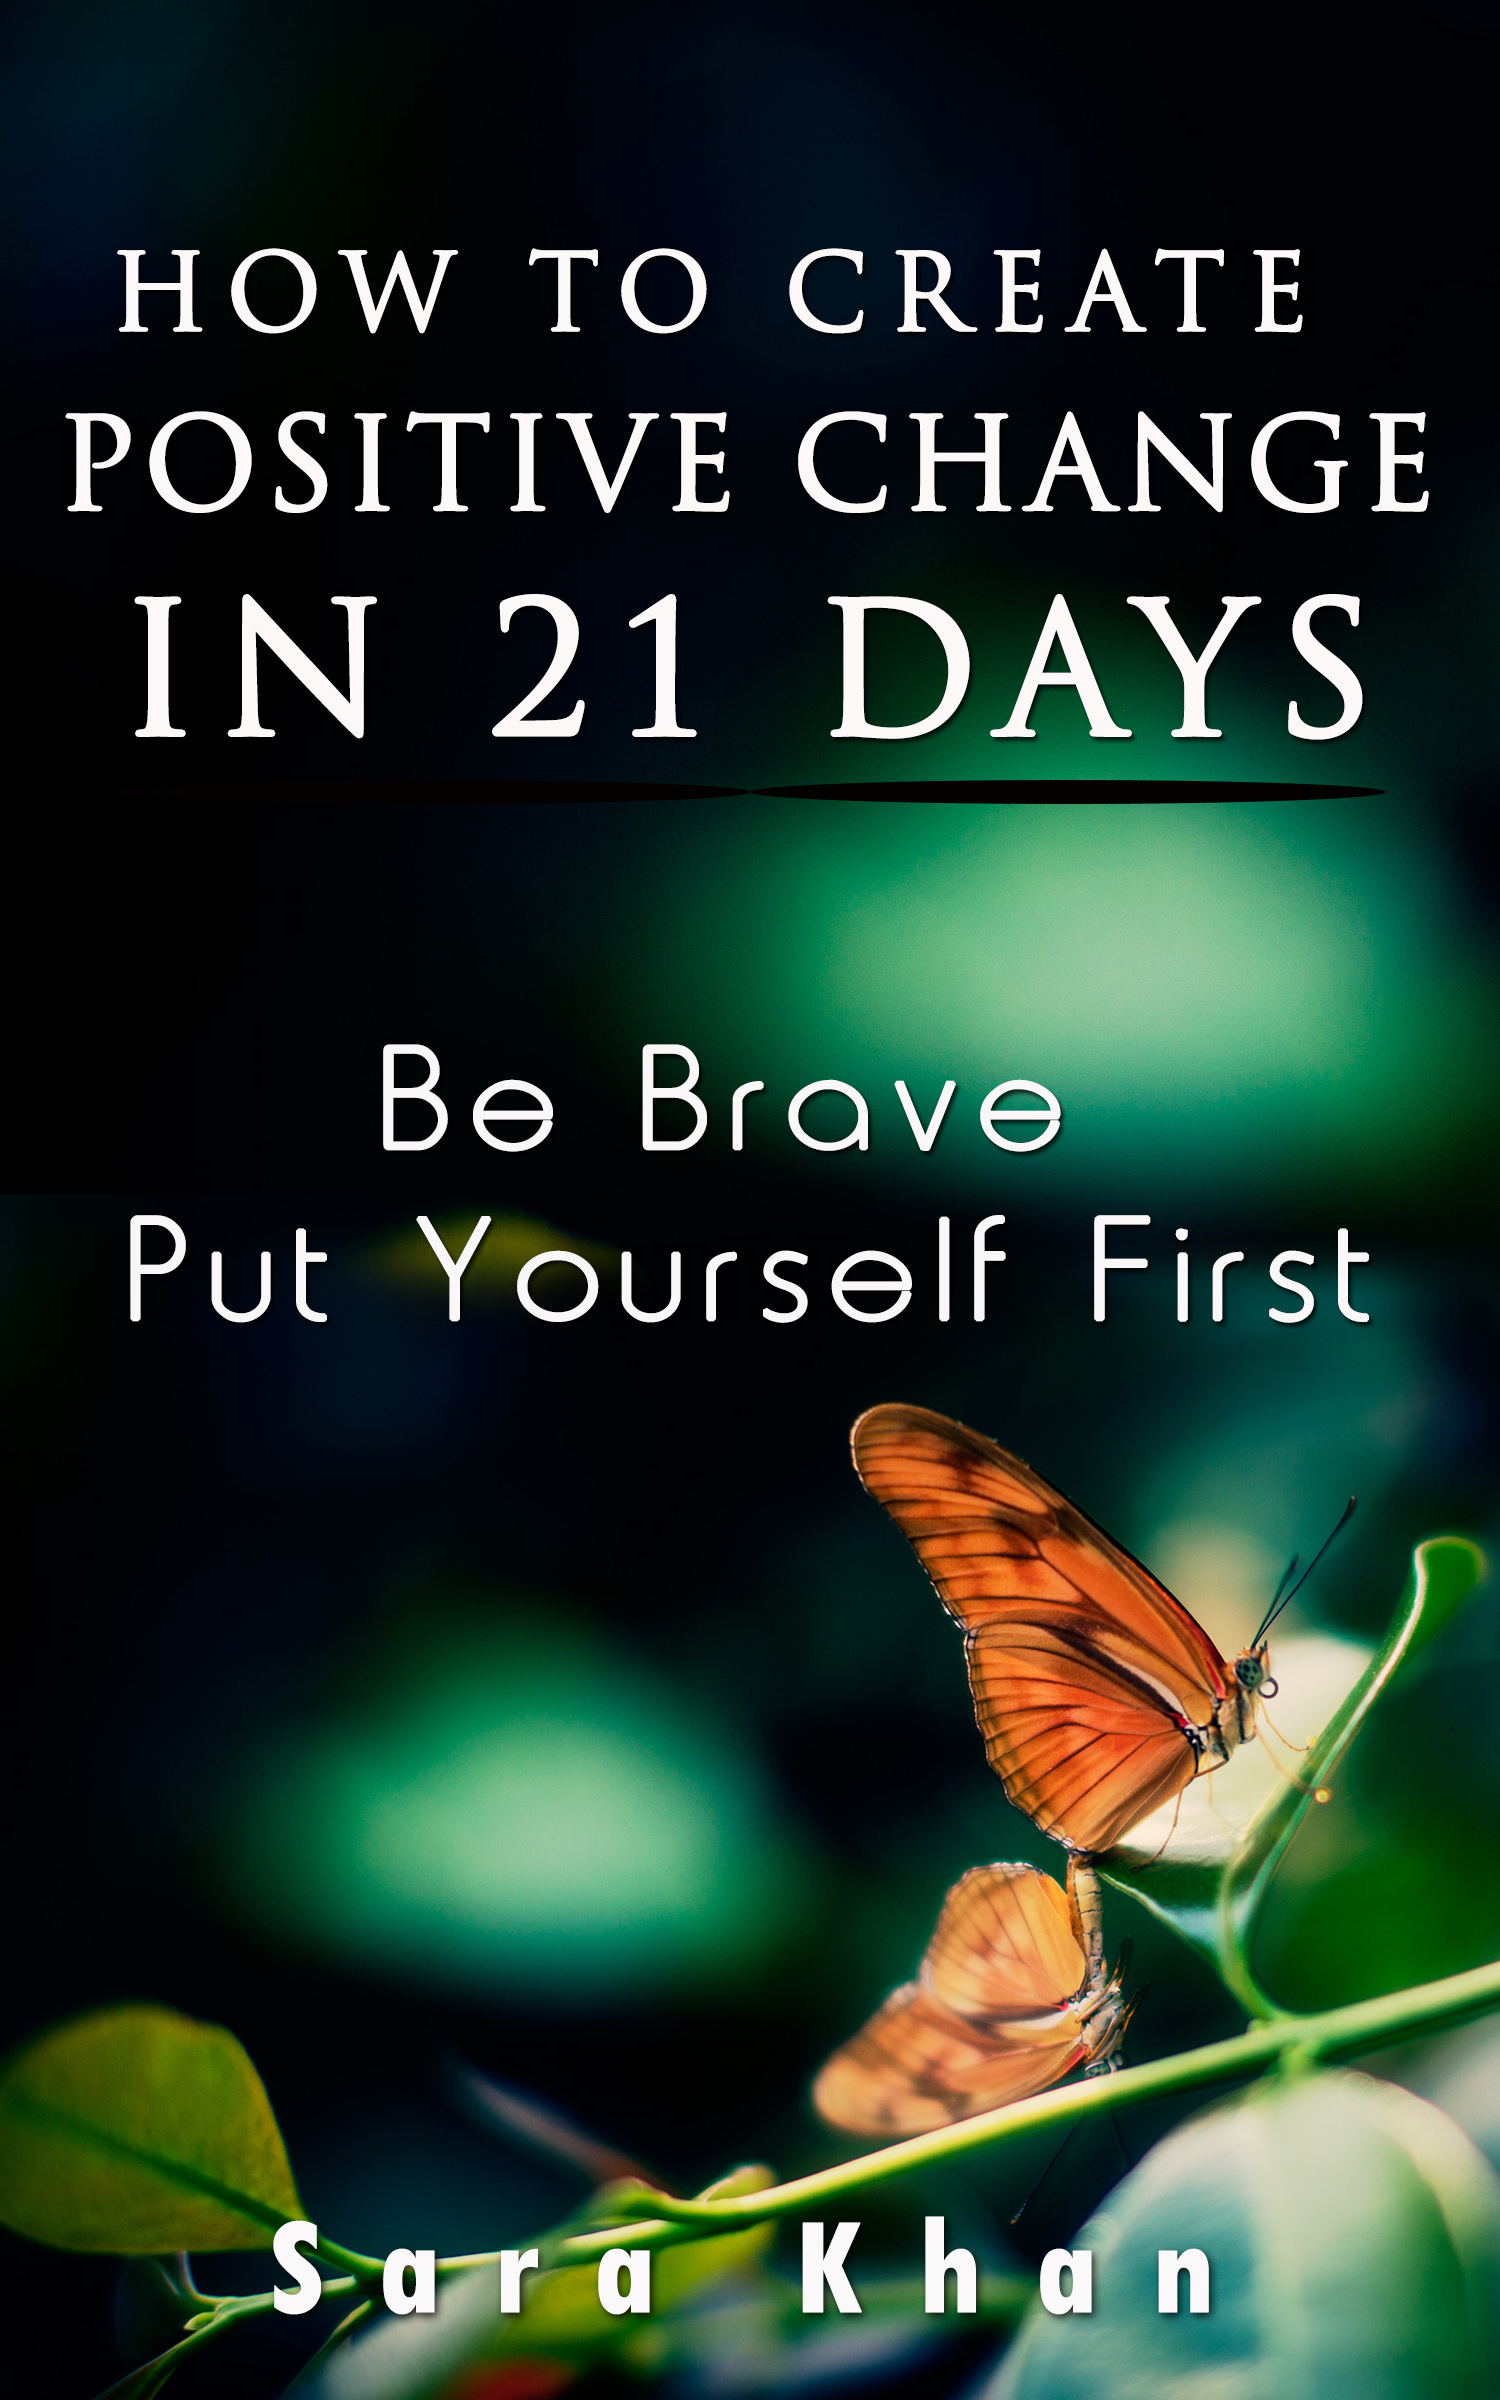 How To Create Positive Change in 21 Days by Author Sara Khan